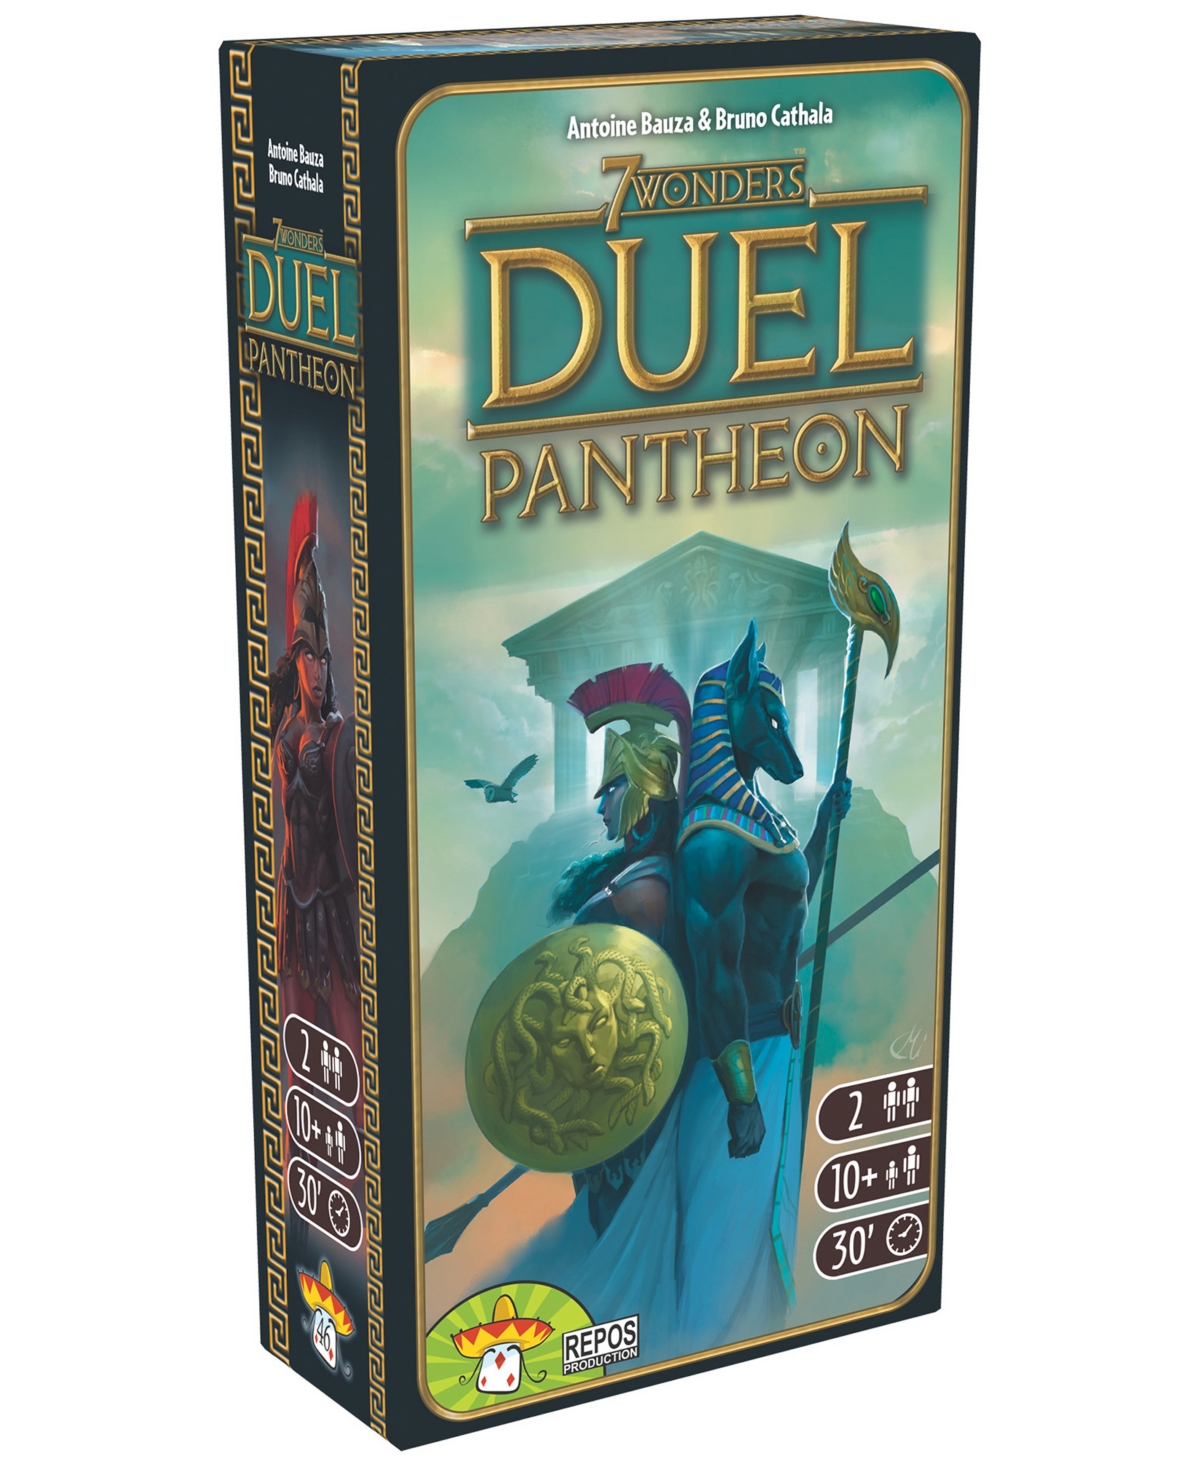 University Games Kids' Repos Production 7 Wonders Duel Pantheon Expansion In No Color